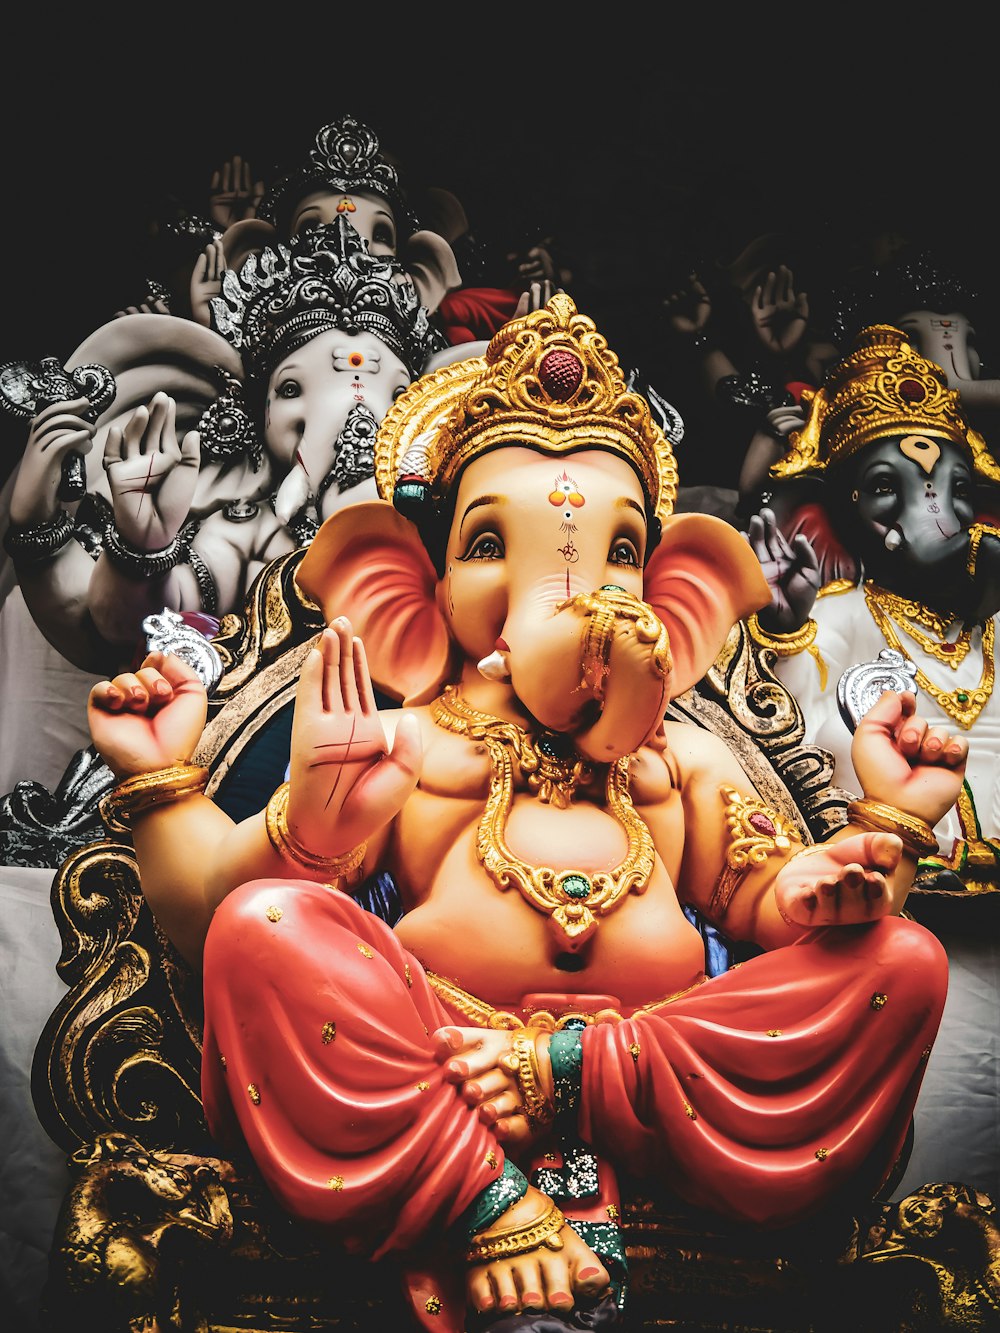 The Ultimate Collection of 999+ HD Ganesh Images: Stunning Ganesh Images in Full 4K